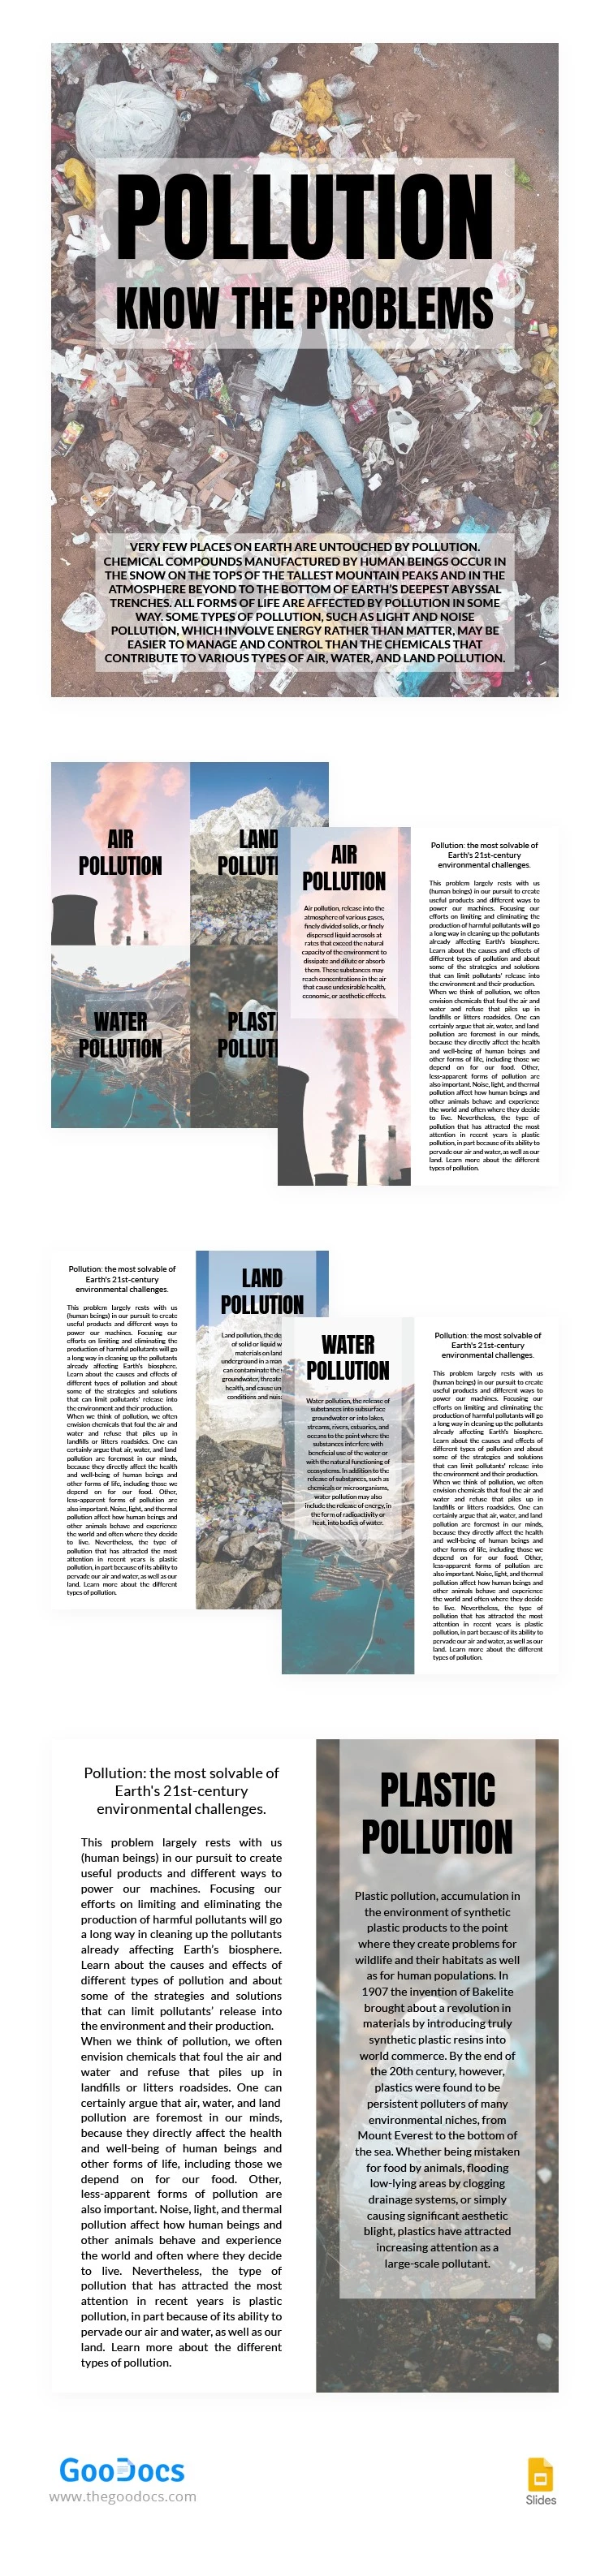 Pollution Book - free Google Docs Template - 10063882